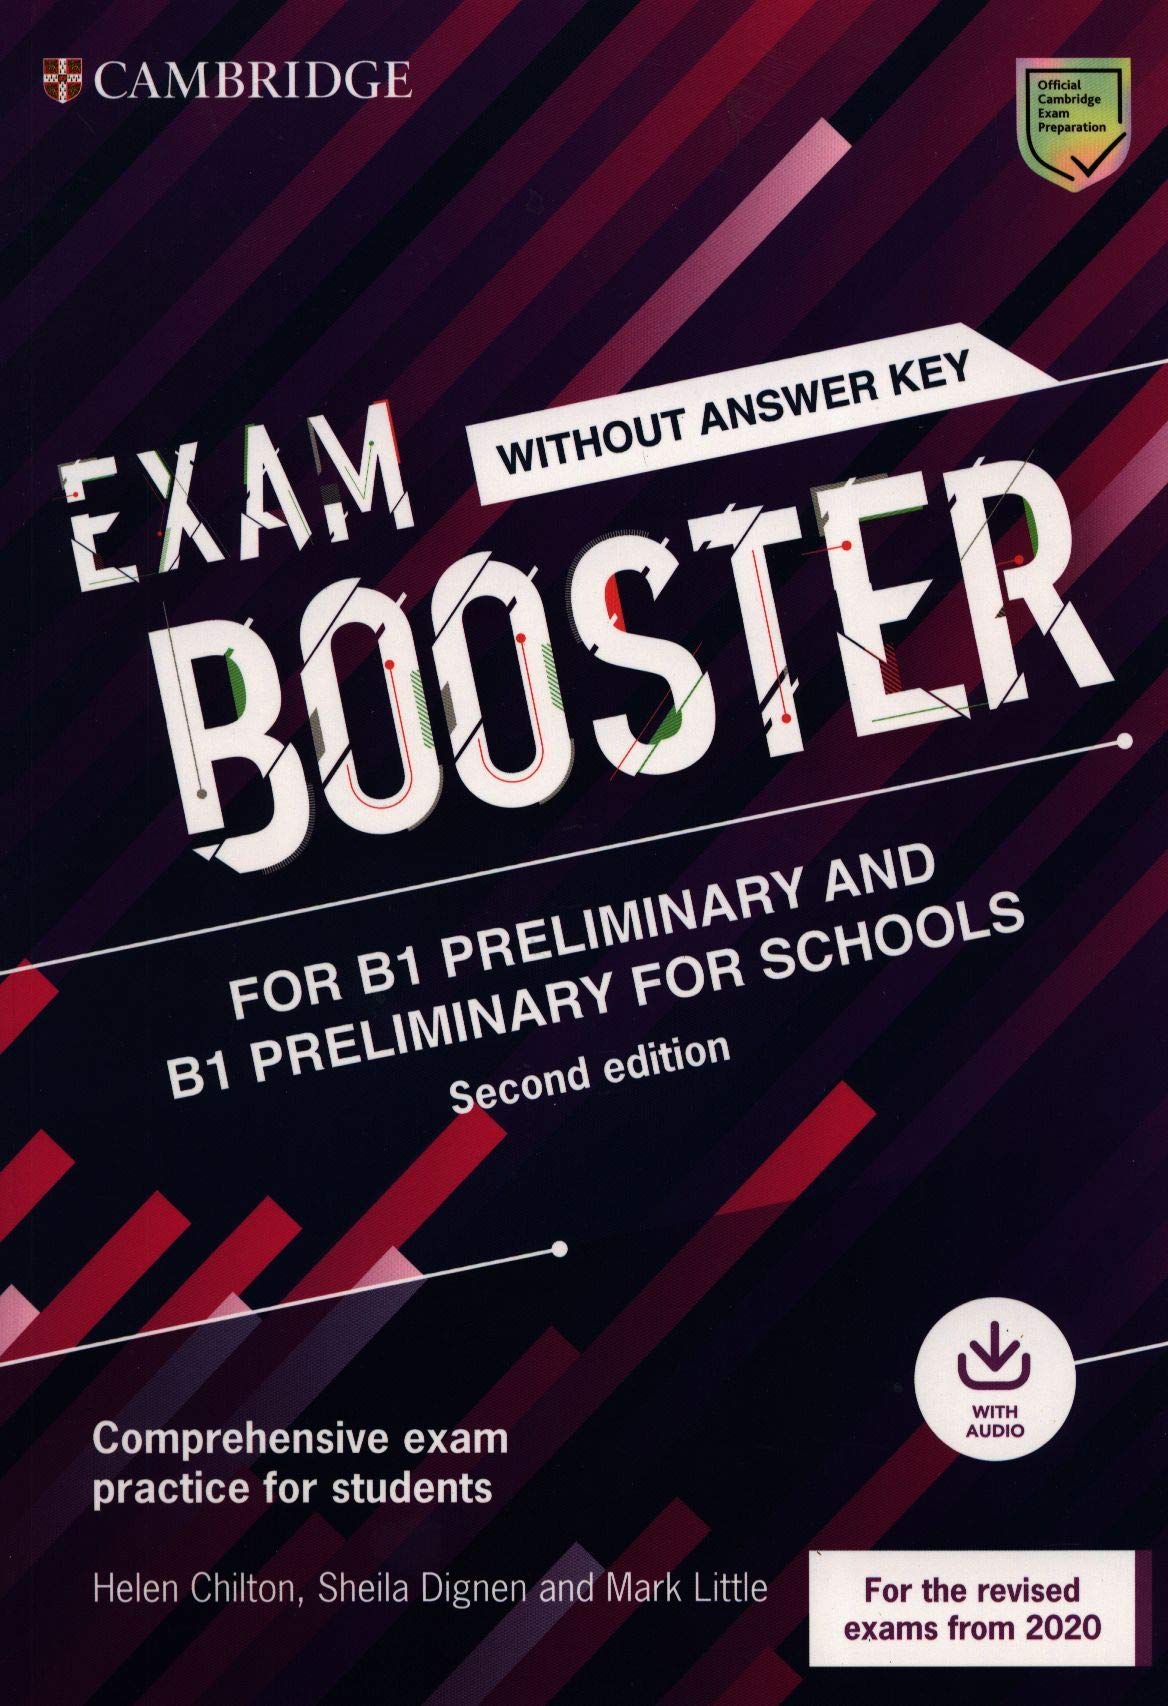 Exam Booster for B1 Preliminary and B1 Preliminary for Schools